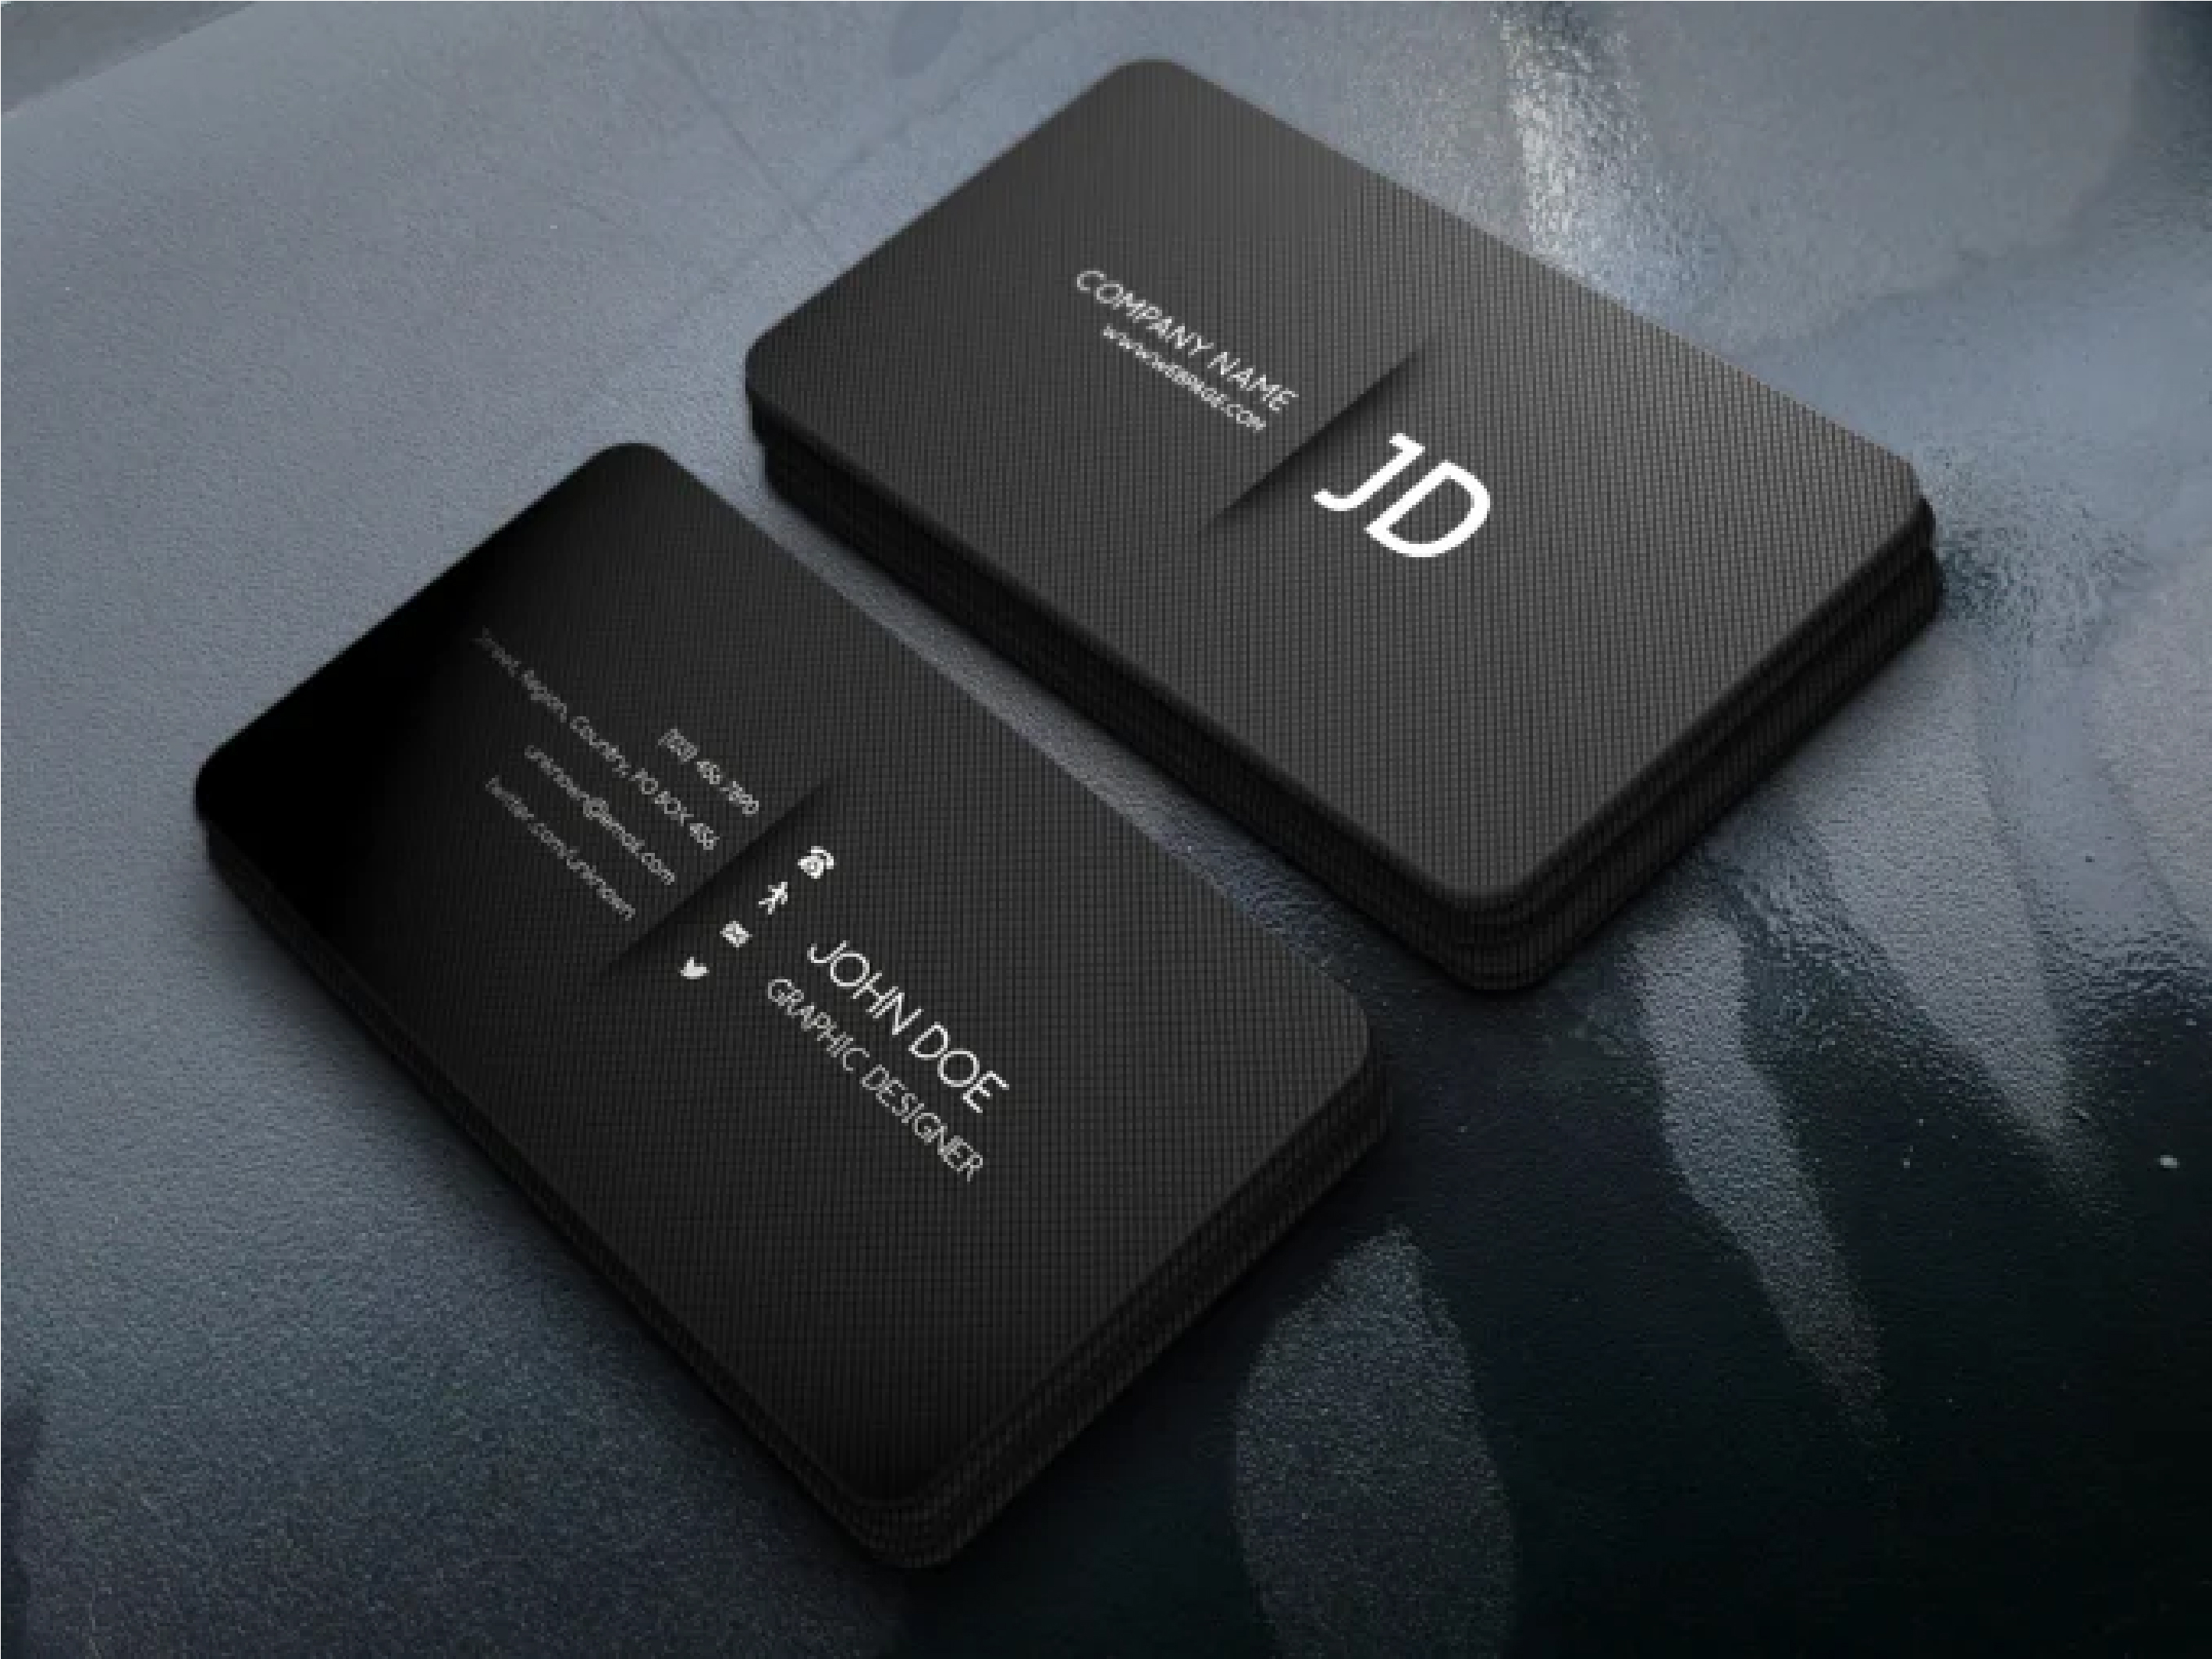 Professional Business Card Design for $5 - PixelClerks